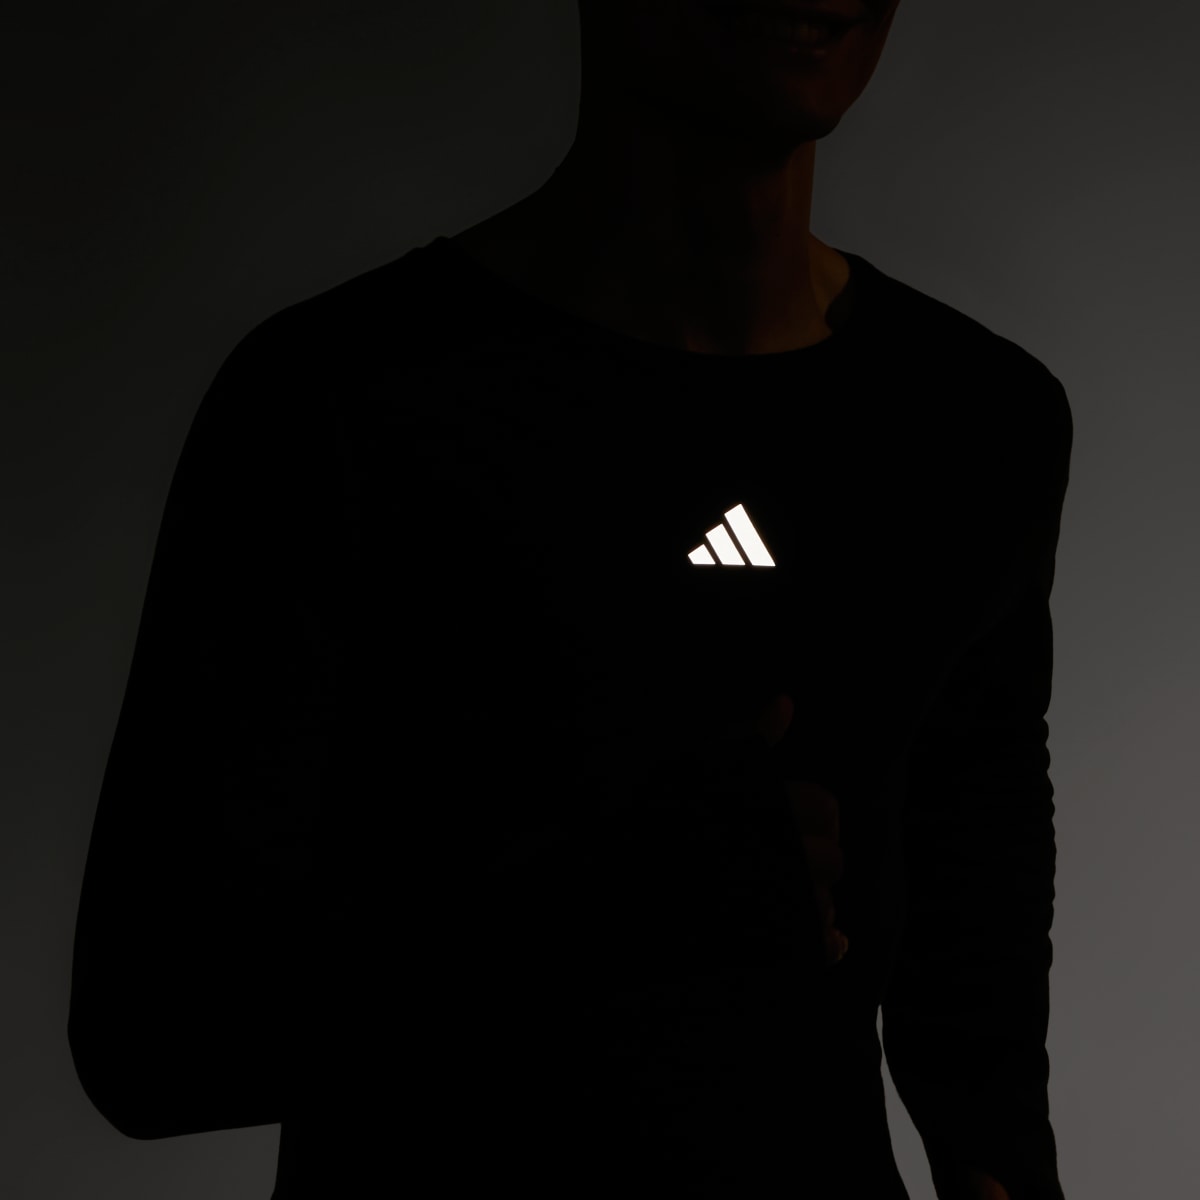 Adidas Ultimate Running Conquer the Elements Merino Long Sleeve Long-sleeve Top. 8